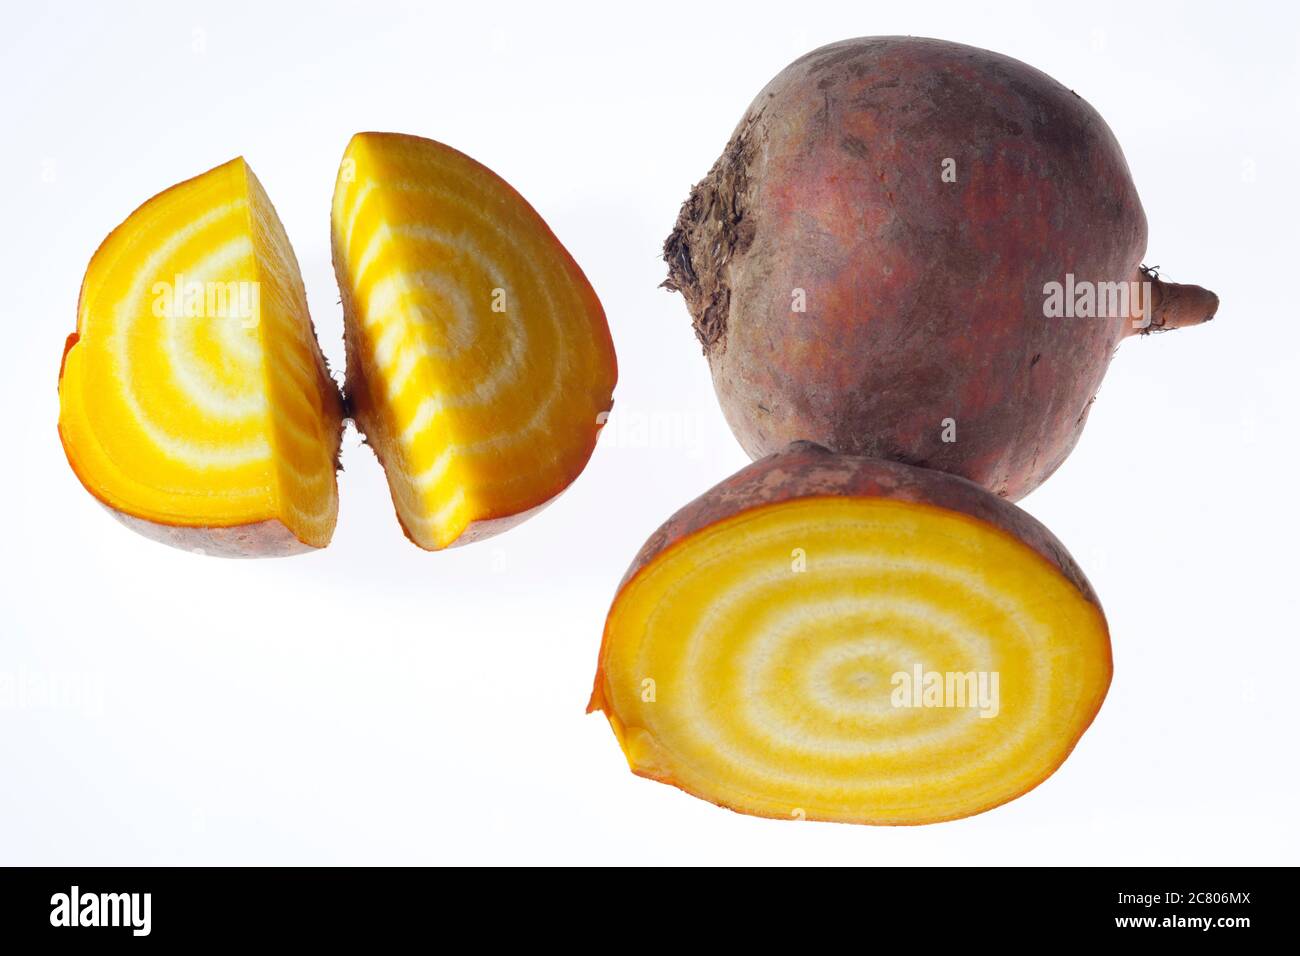 A freshly cut open Golden Yellow striped beetroot on a white light box background Stock Photo